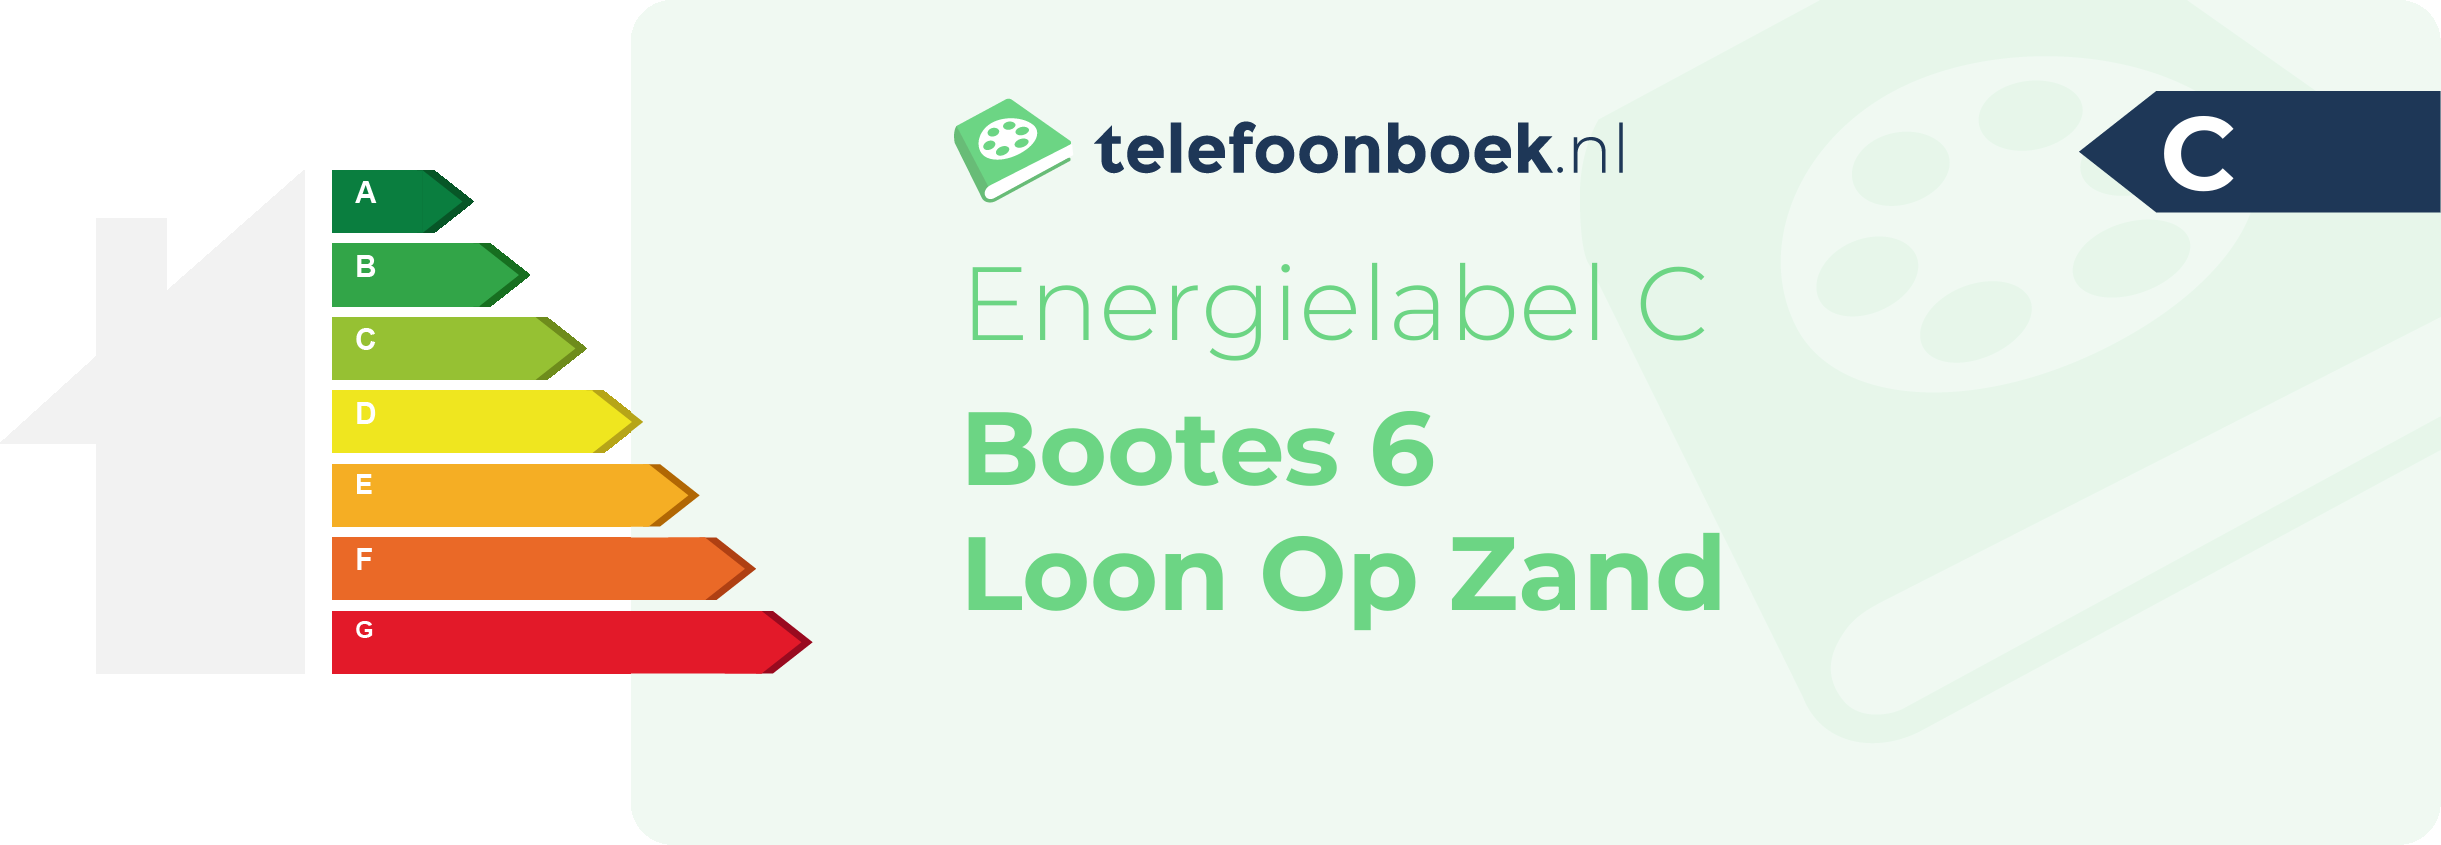 Energielabel Bootes 6 Loon Op Zand